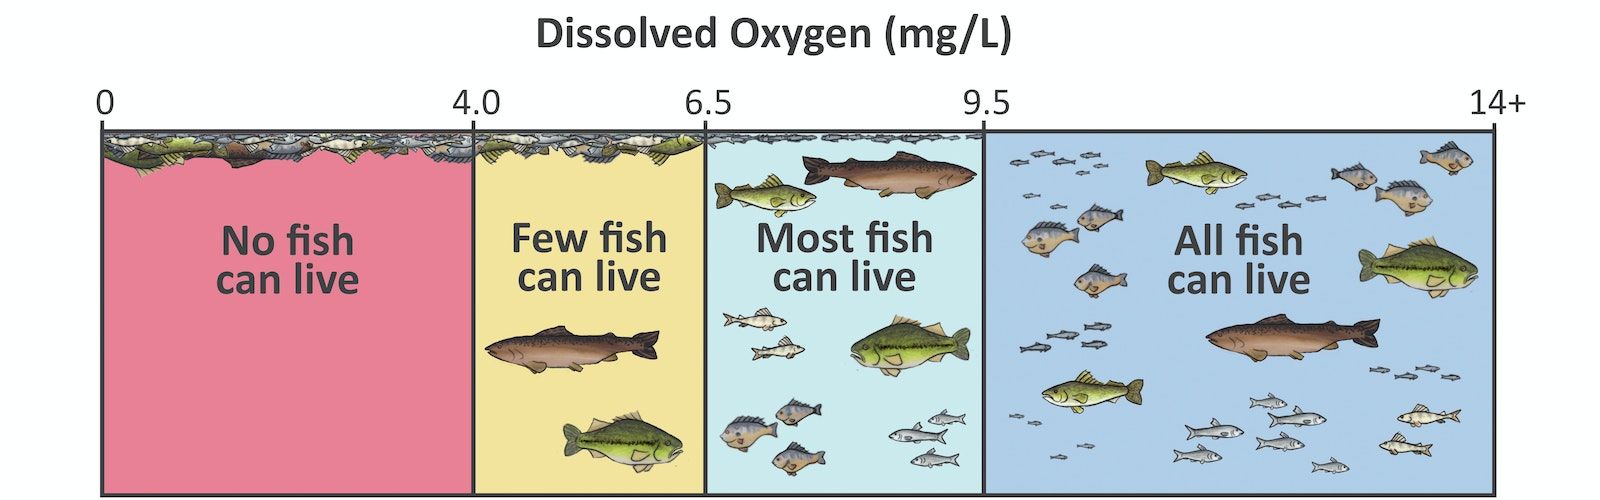 Scale showing water with dissolved oxygen concentrations of 0-4 milligrams per liter, where no fish can live; dead fish are illustrated at the water surface. Between 4.0-6.5 milligrams per liter few fish can live; dead fish and two live fish are illustrated. Between 6.5-9.5 milligrams per liter most fish can live; many live fish and few dead fish are shown. From 9.5 to more than 14 milligrams per liter all fish can live; many live fish are illustrated.